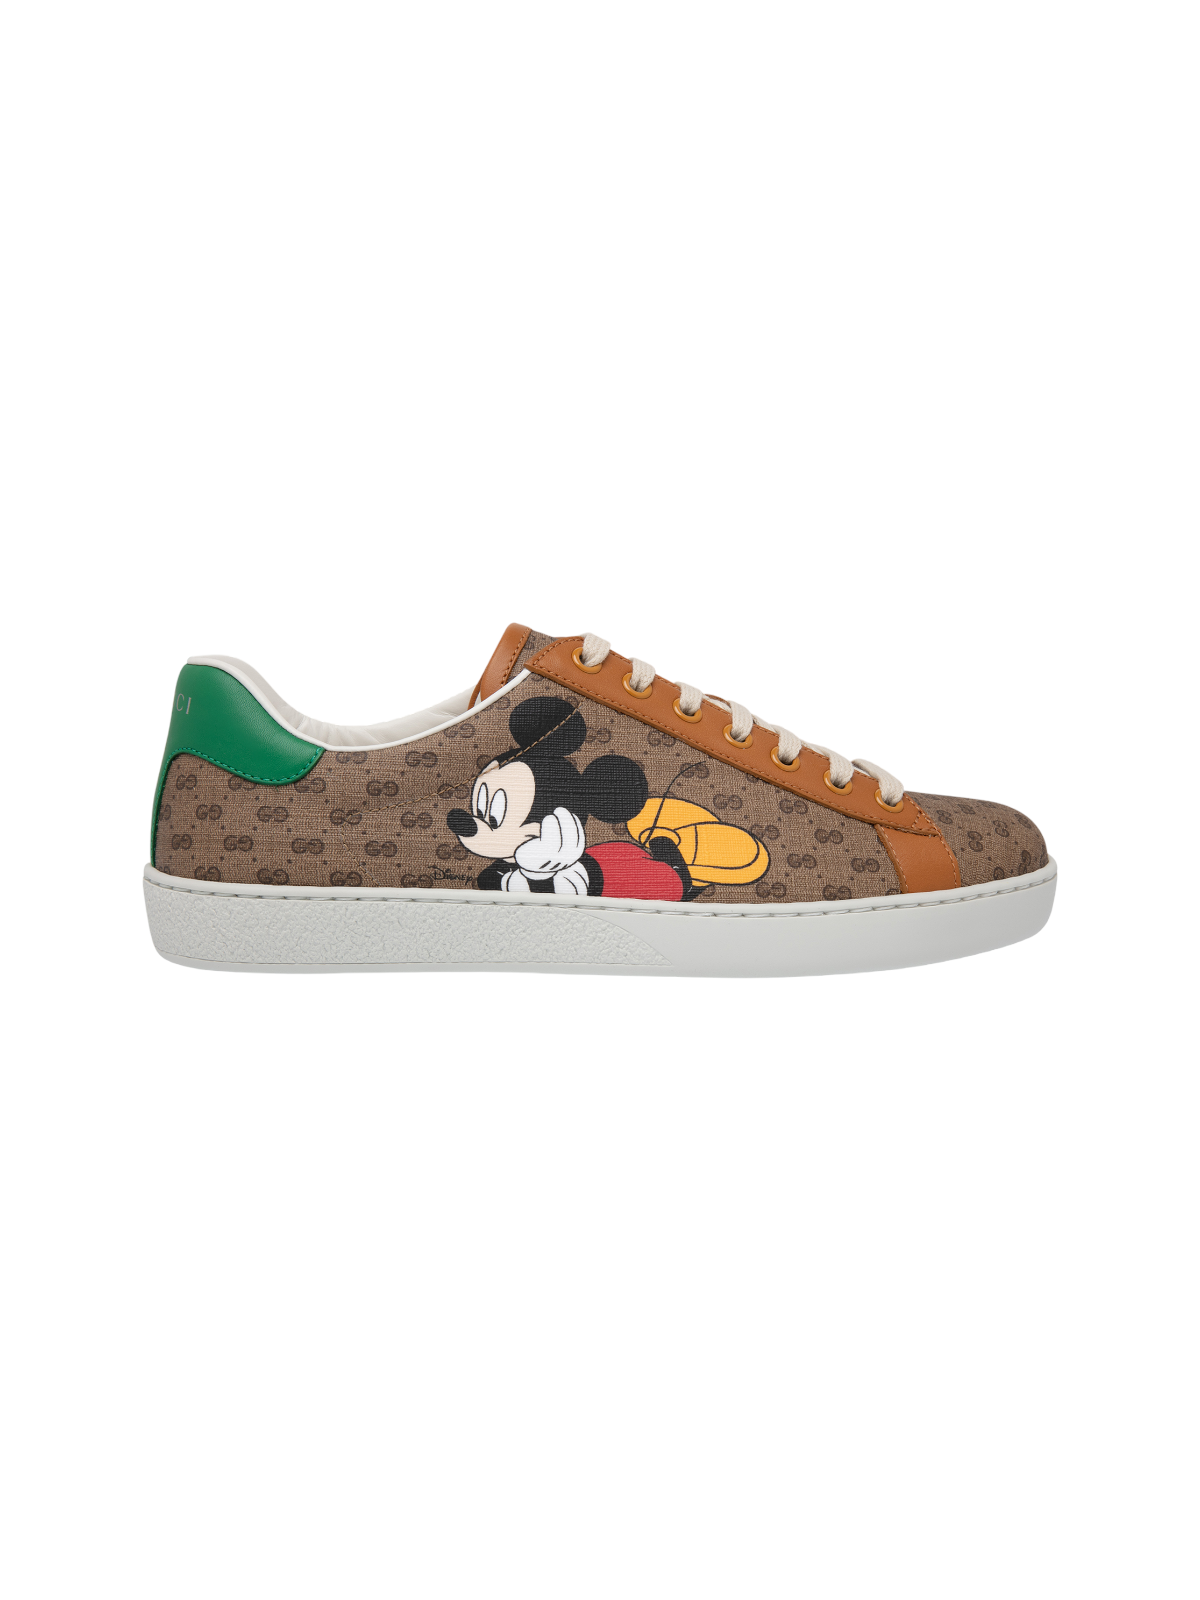 Gucci x Disney Mickey Mouse Monogram Sneakers